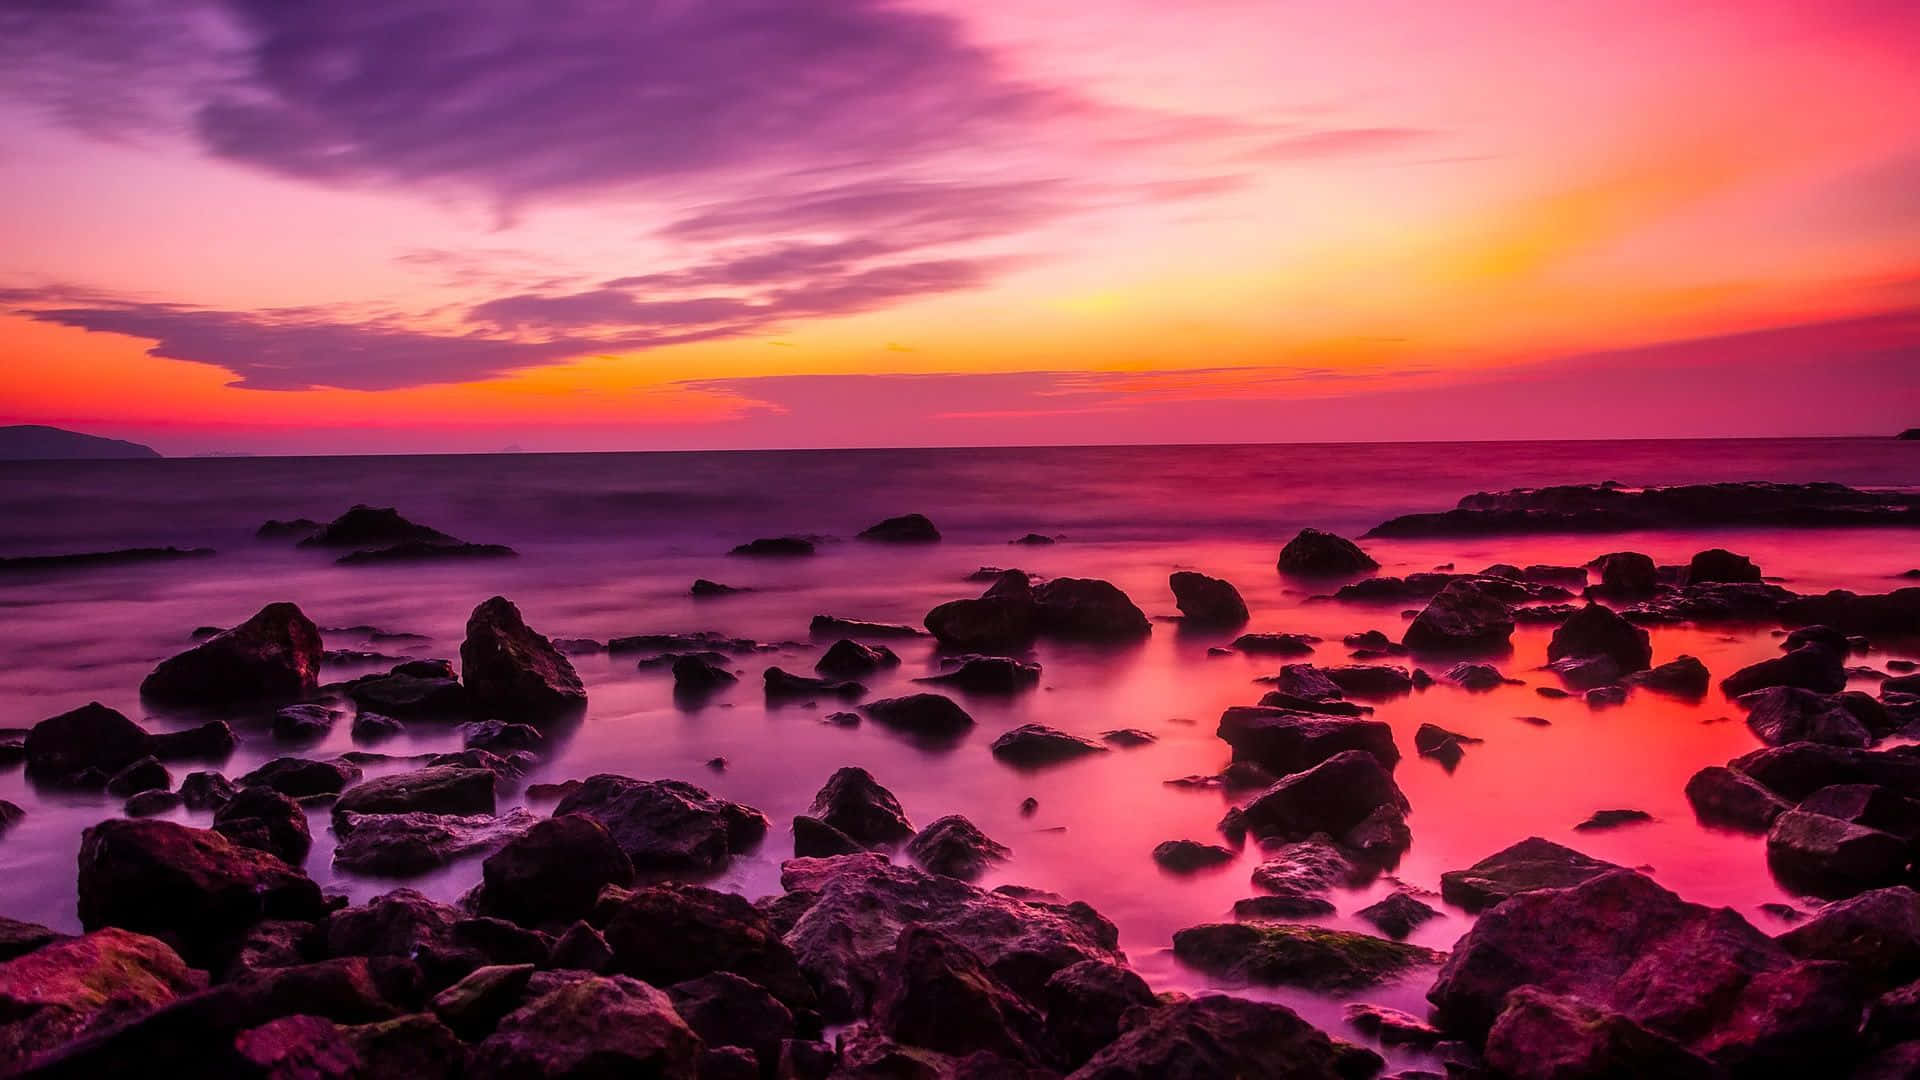 a sunset with rocks and a colorful sky